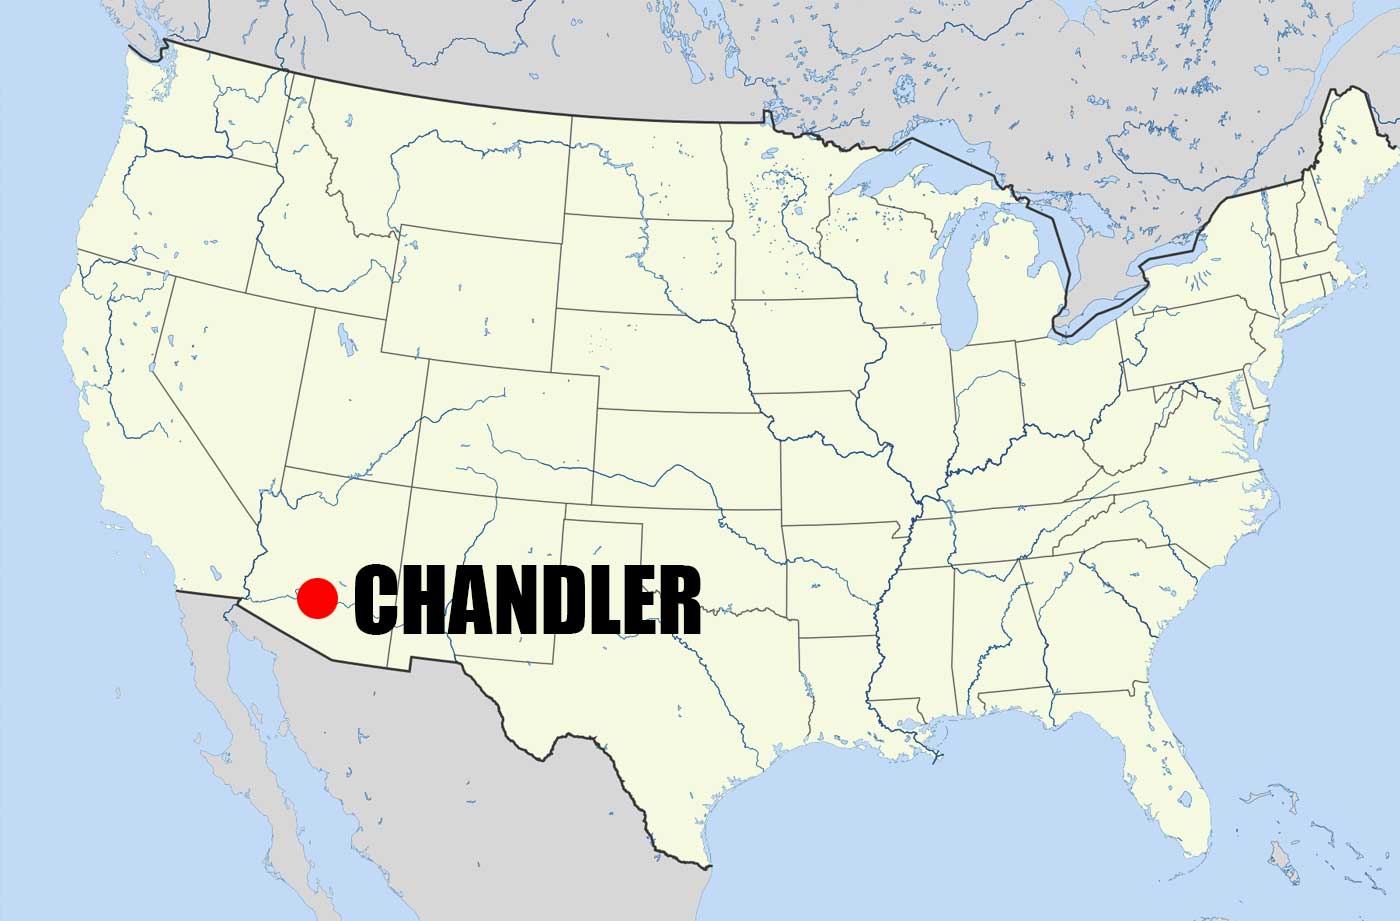 Location of Chandler City on US Map